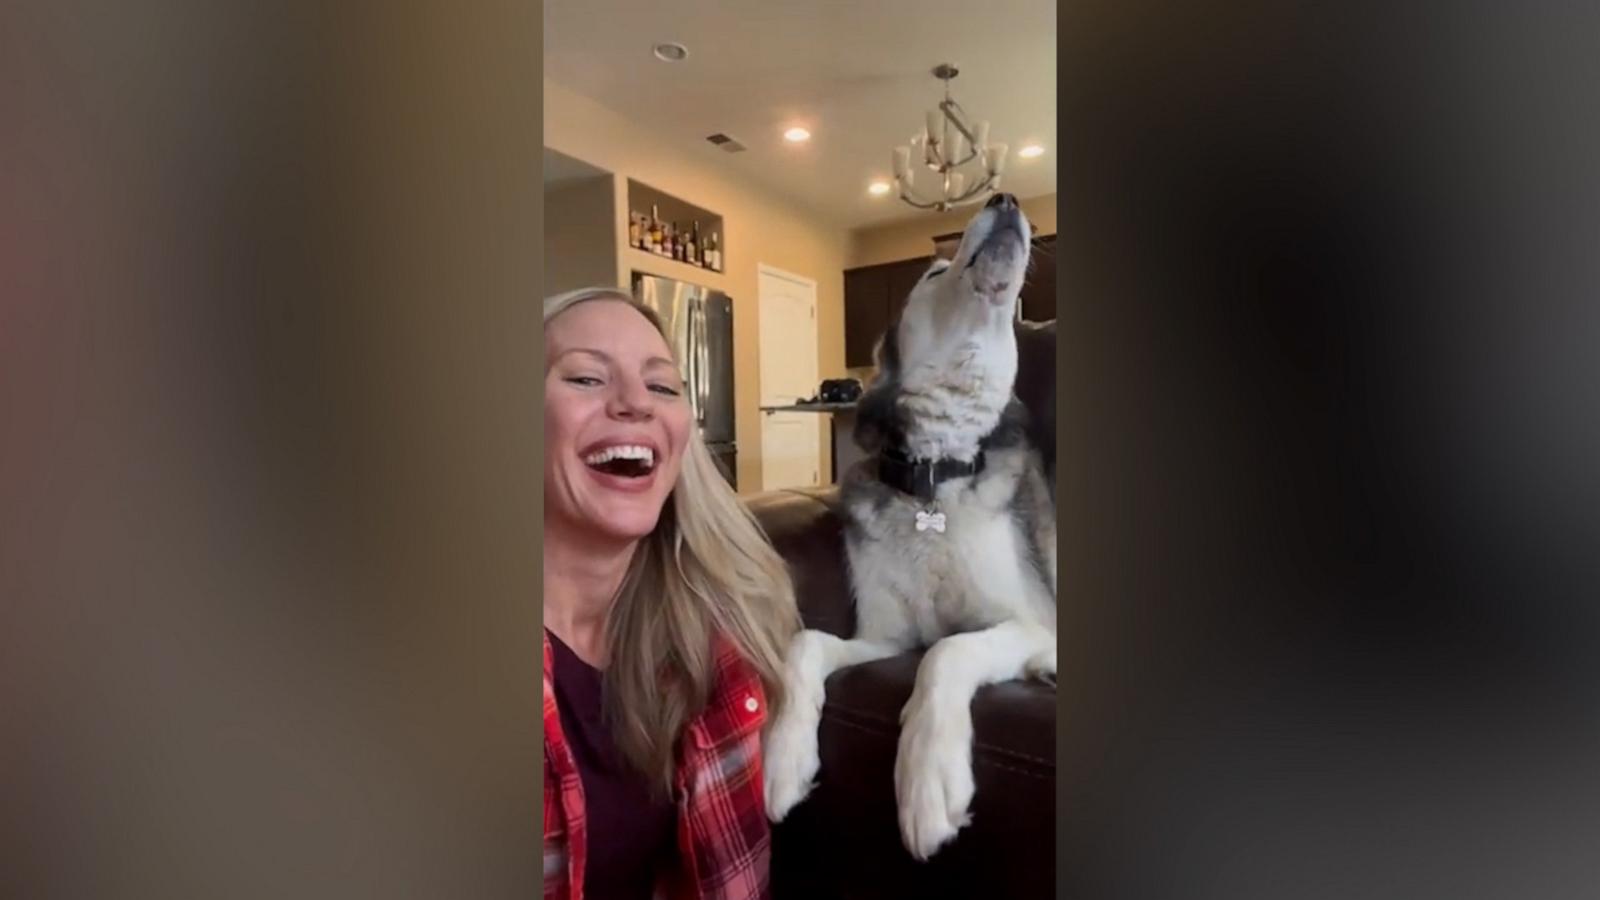 VIDEO: Watch this husky say 'I love you'